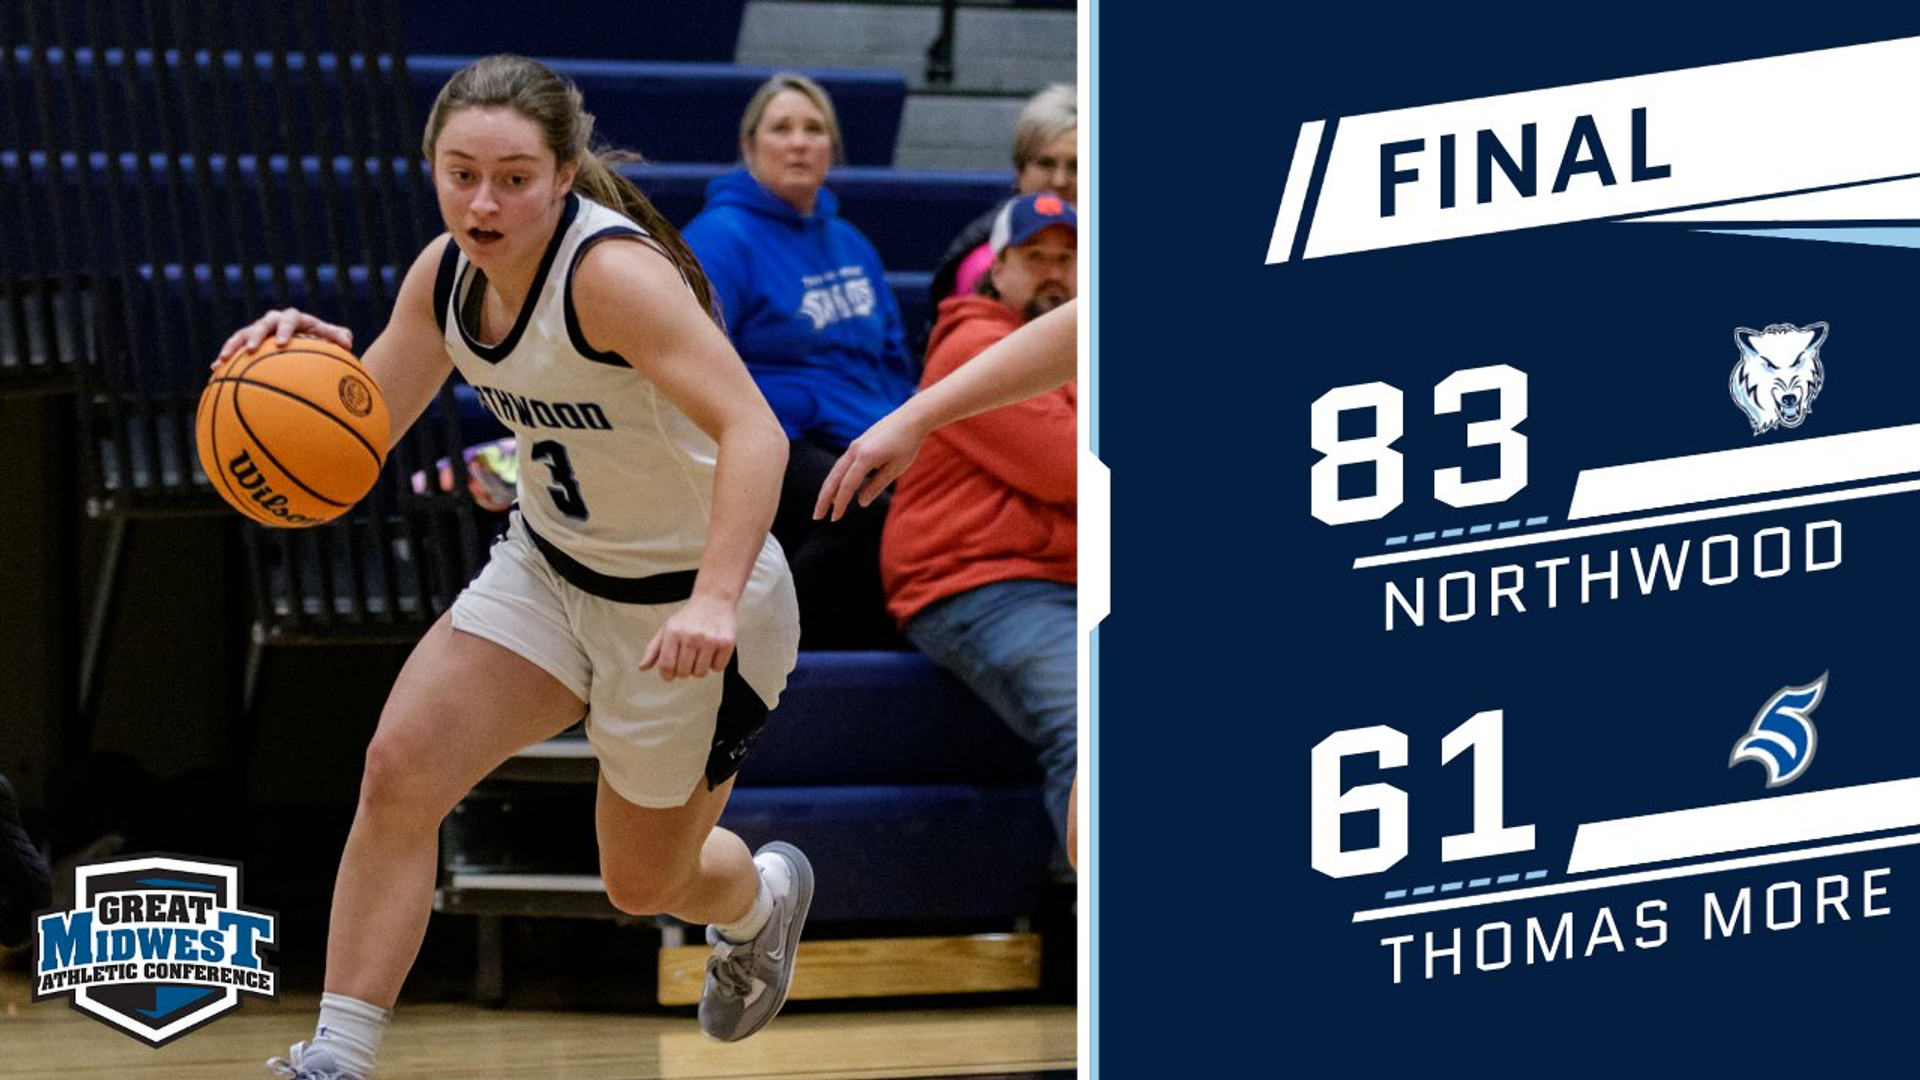 Women's Basketball Opens G-MAC Play With 83-61 Win Over Thomas More